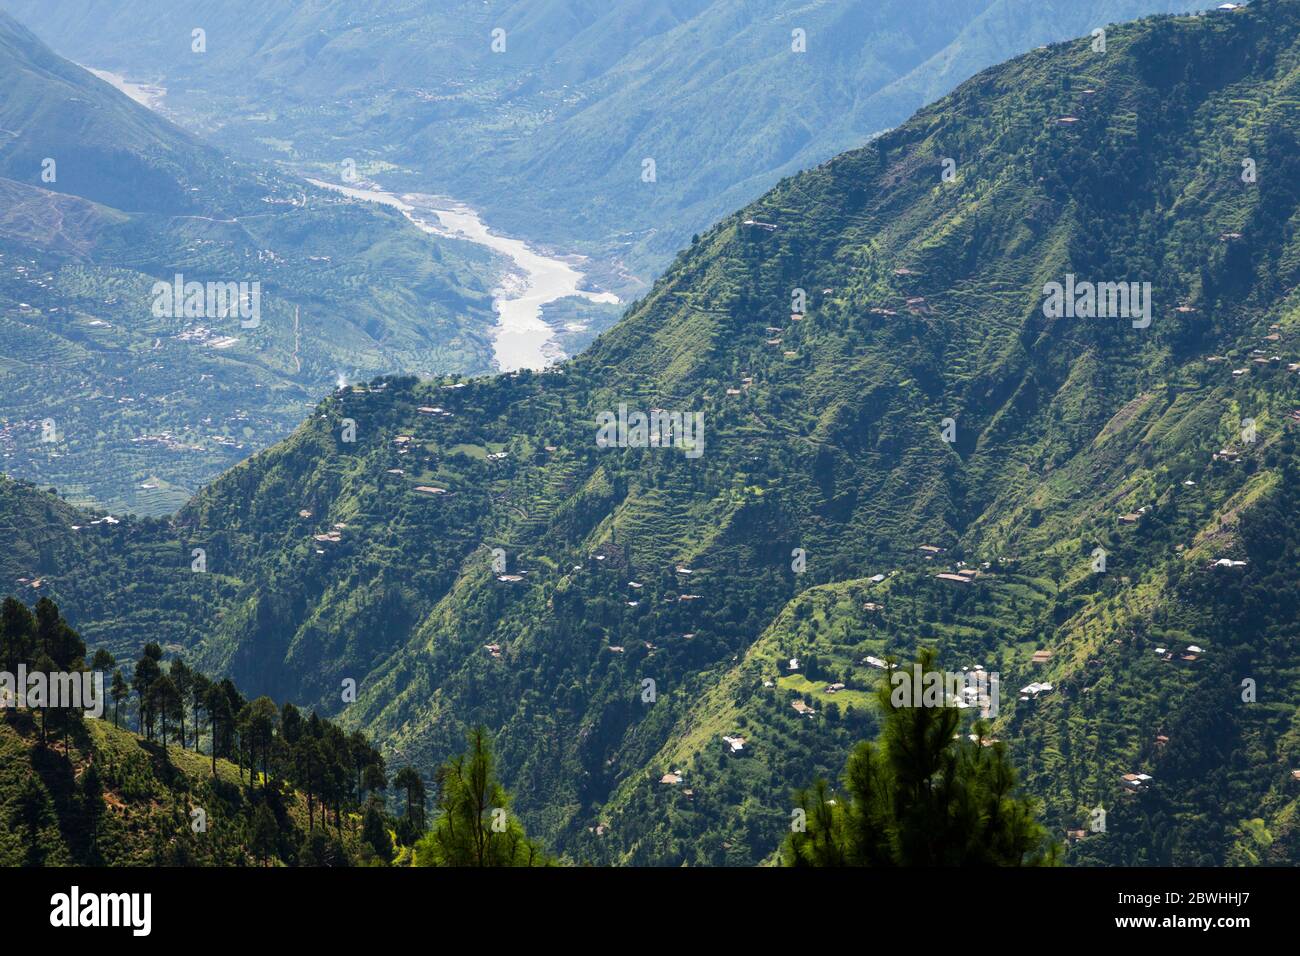 Indus valley from ancient battle field Pirsar(Aornos fortress) trekking,Bisham, Shangla, Khyber Pakhtunkhwa Province, Pakistan, South Asia, Asia Stock Photo